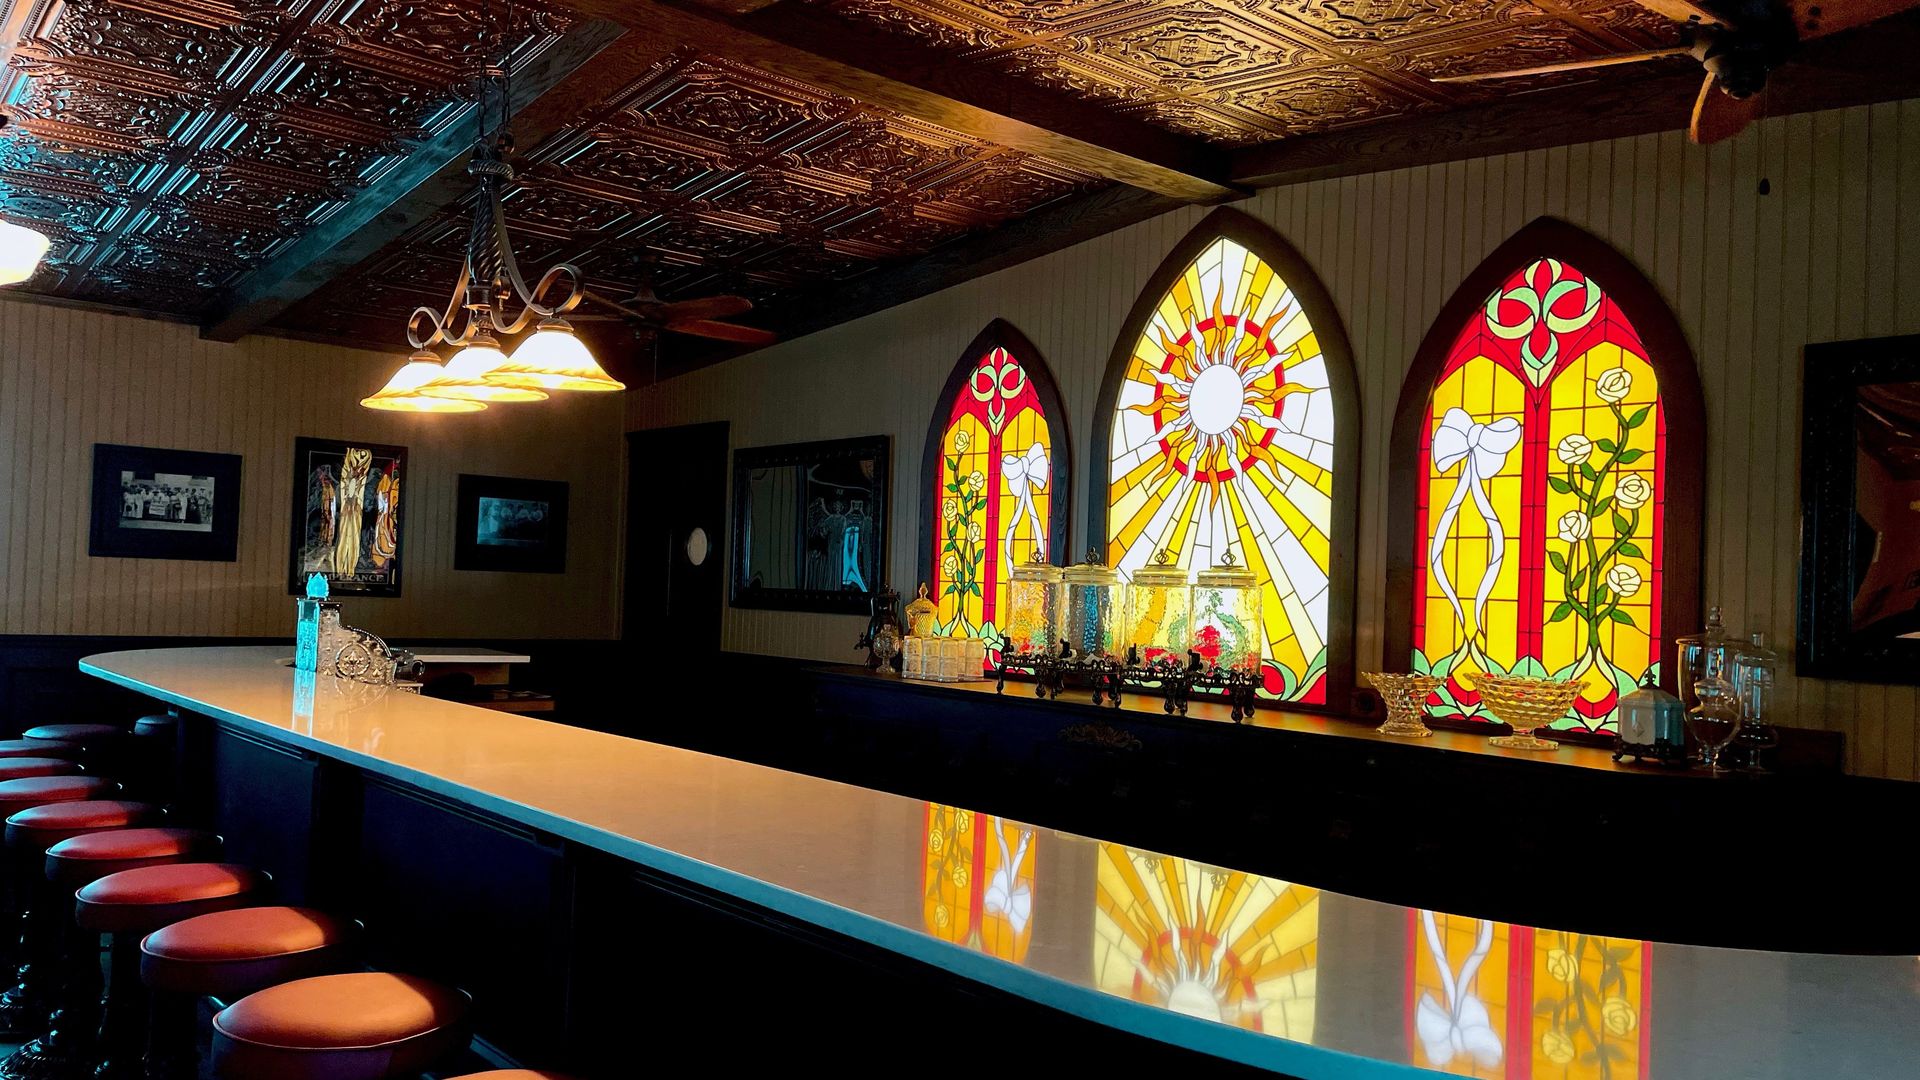 A bar with bright stained glass windows.